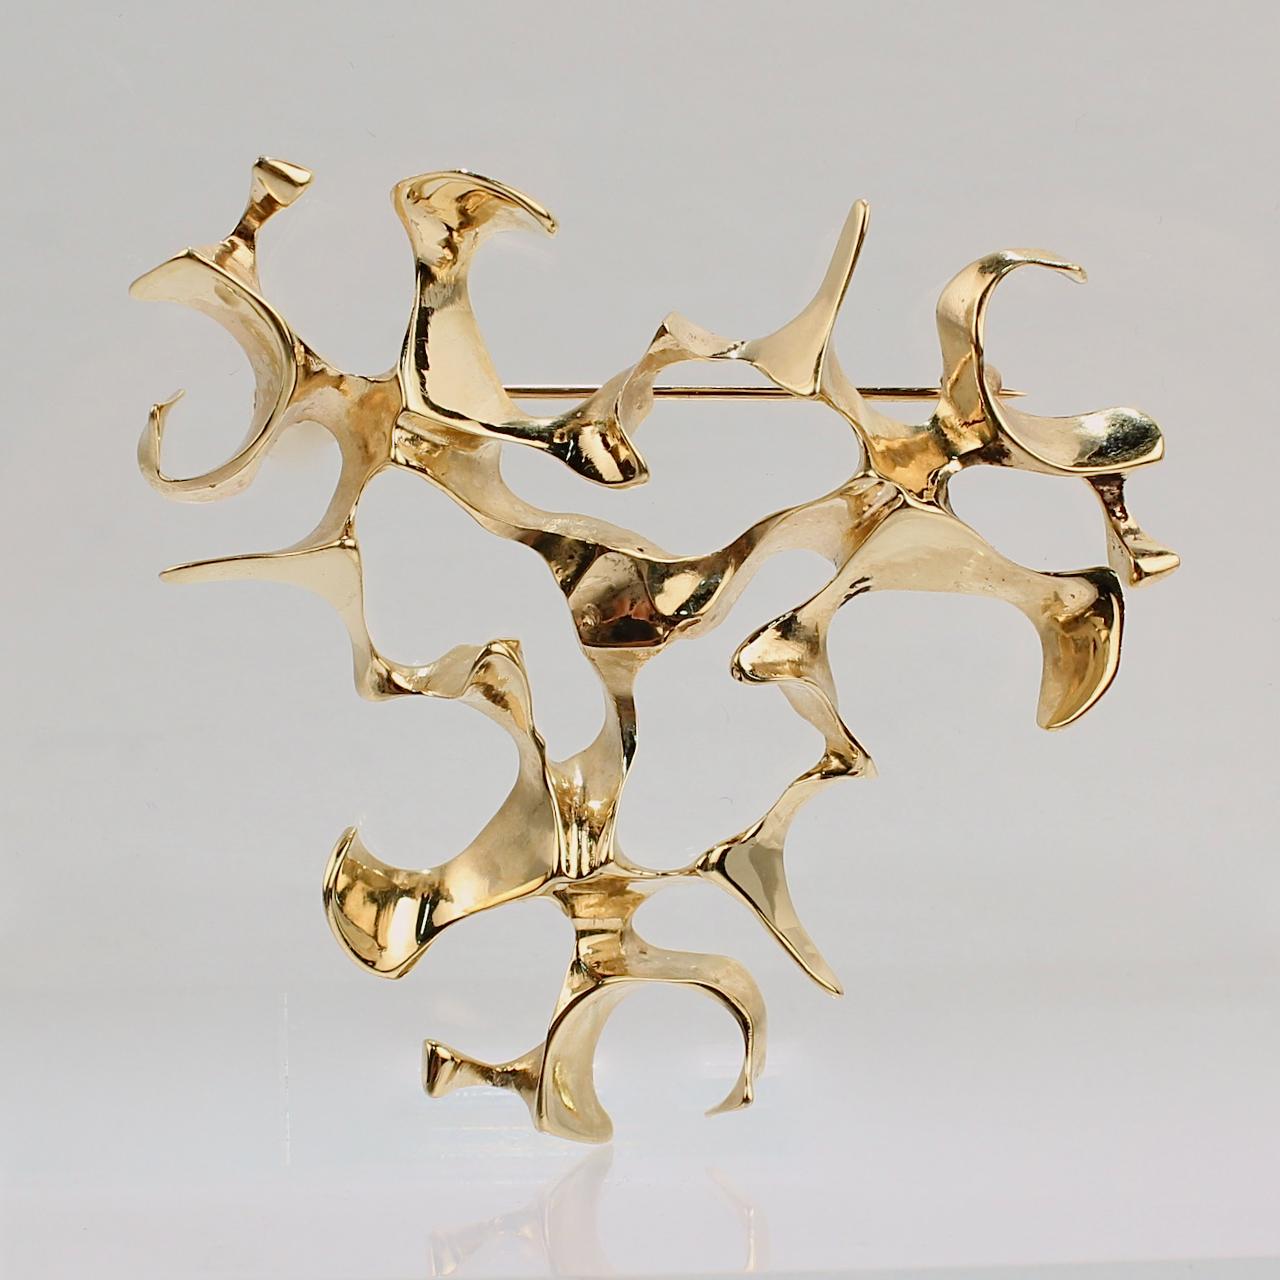 A very fine modernist brooch by Ronald Hayes Pearson. 

In 14k yellow gold.

Ronald Pearson is an extremely important figure in the 20th Century American Craft movement. Together with John Prip and others, Ronald Pearson opened the highly acclaimed